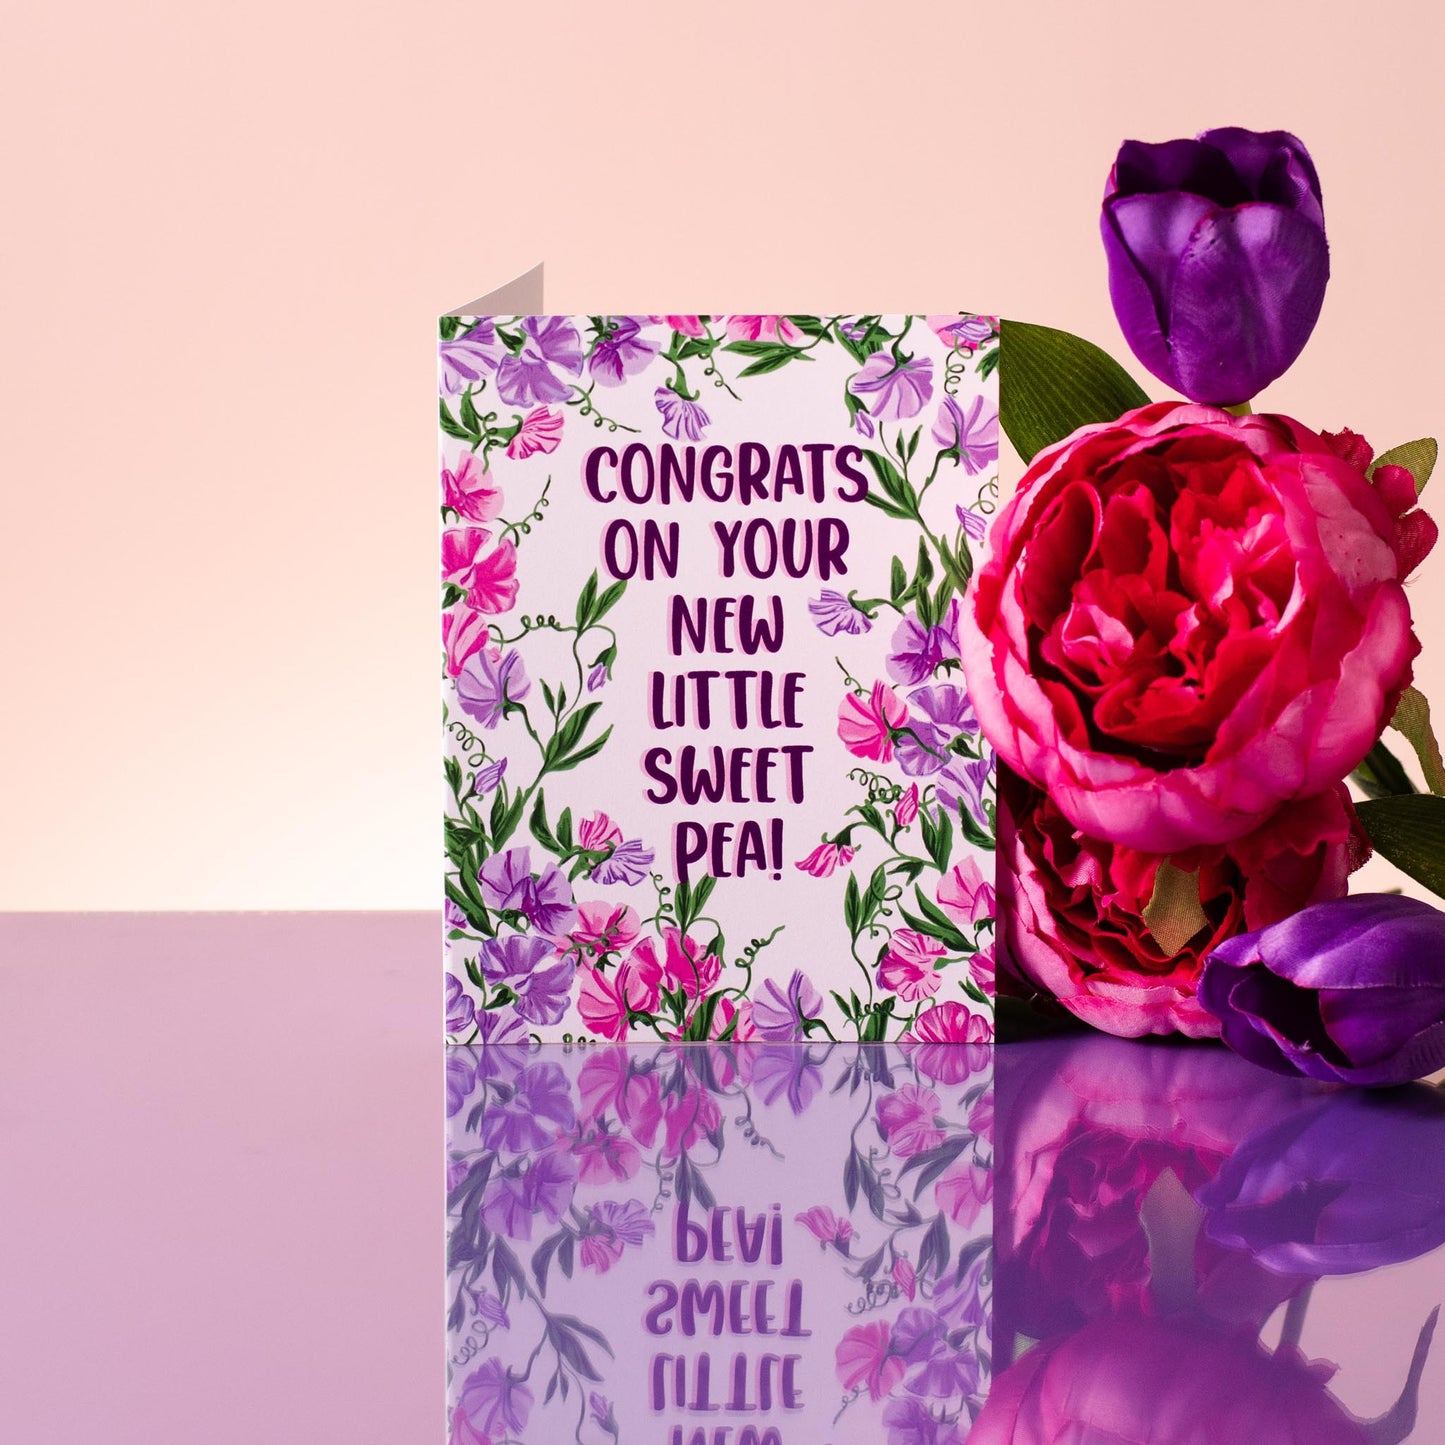 Congrats On Your Sweet Little Sweet Pea!  - Greeting Card